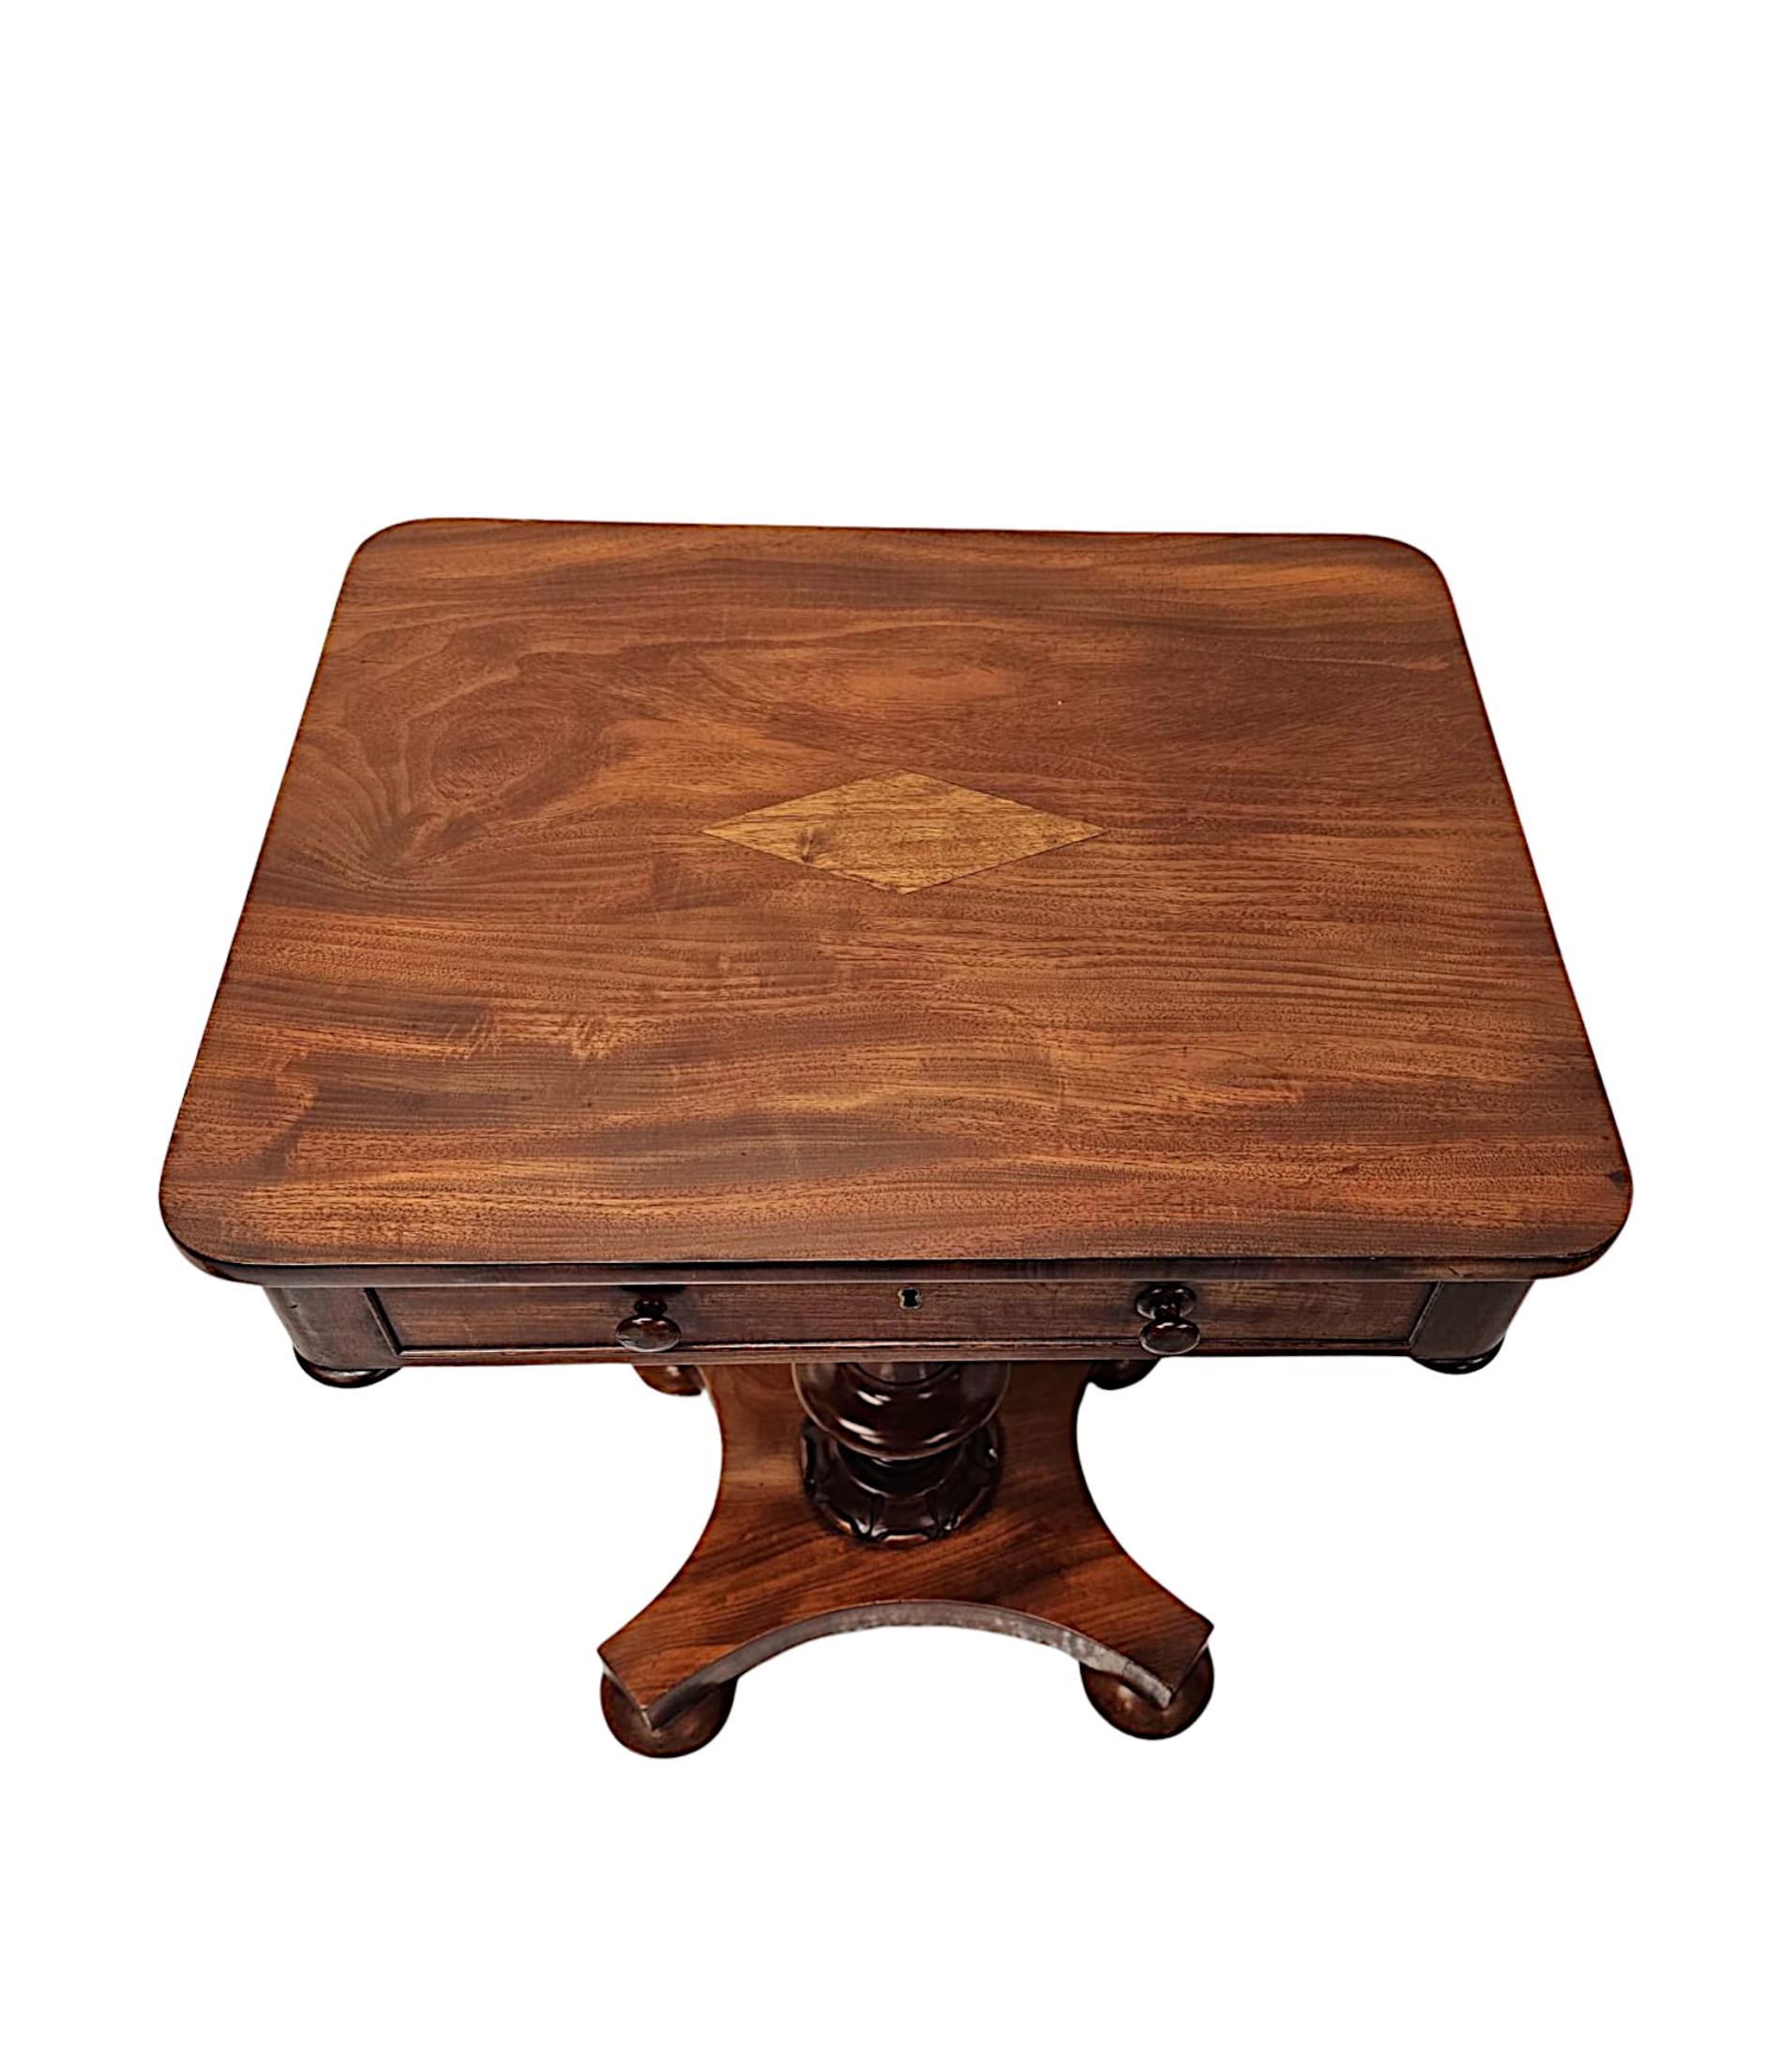 A stunning early 19th Century William IV mahogany lamp, side or centre table, finely hand carved and of exceptional quality with rich patination and grain.  The well figured moulded top of rectangular form with finial detail is embellished to the